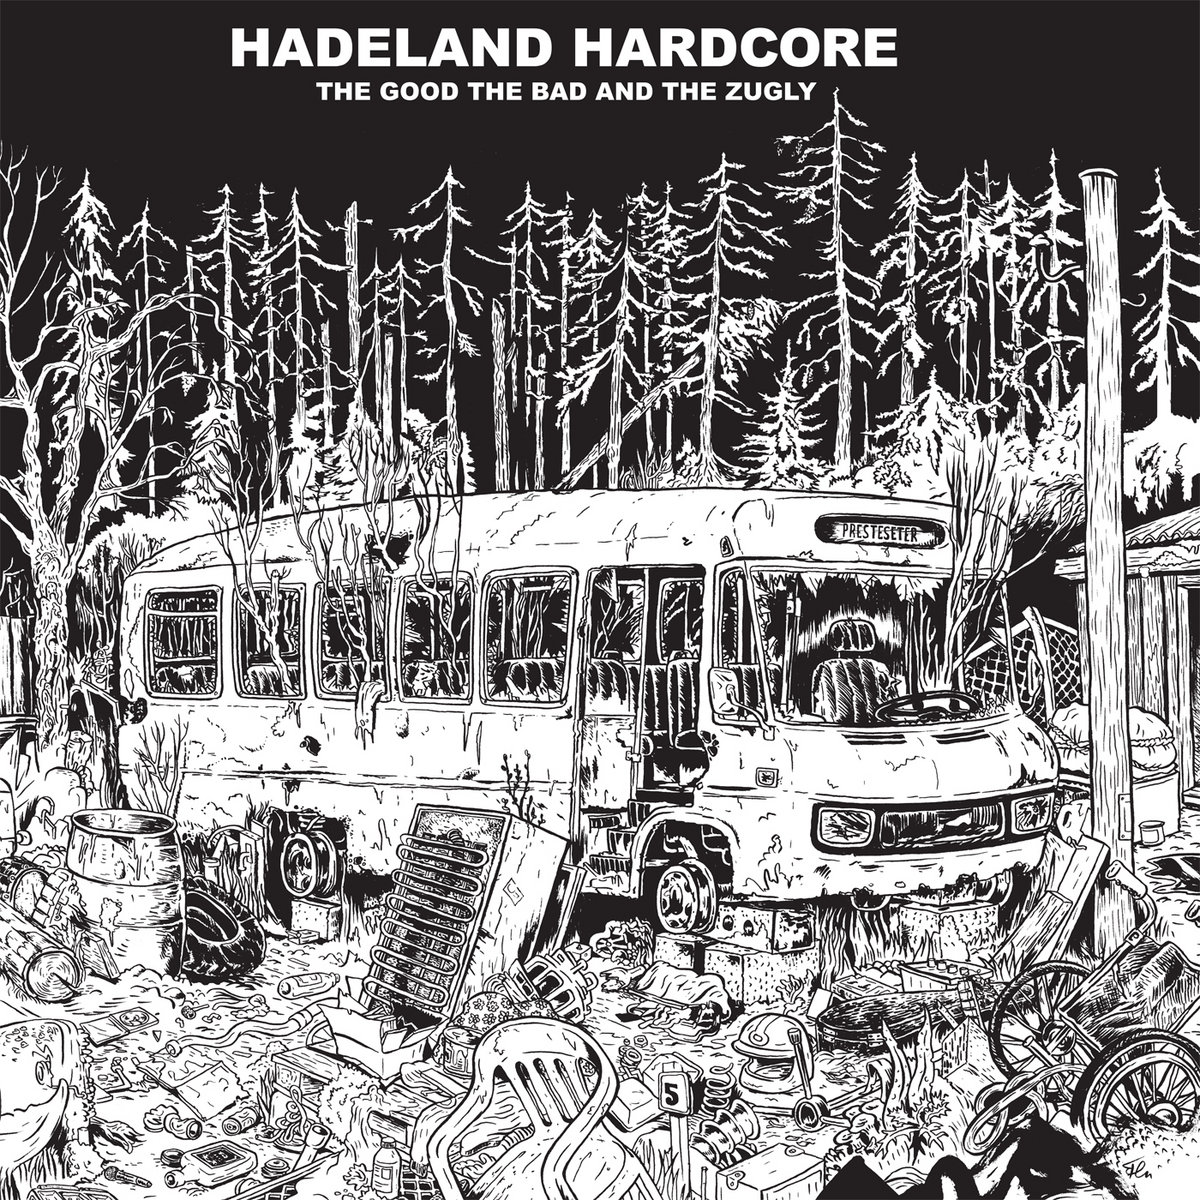 The-Good-The-Bad-And-The-Zugly---Hadeland-Hardcore